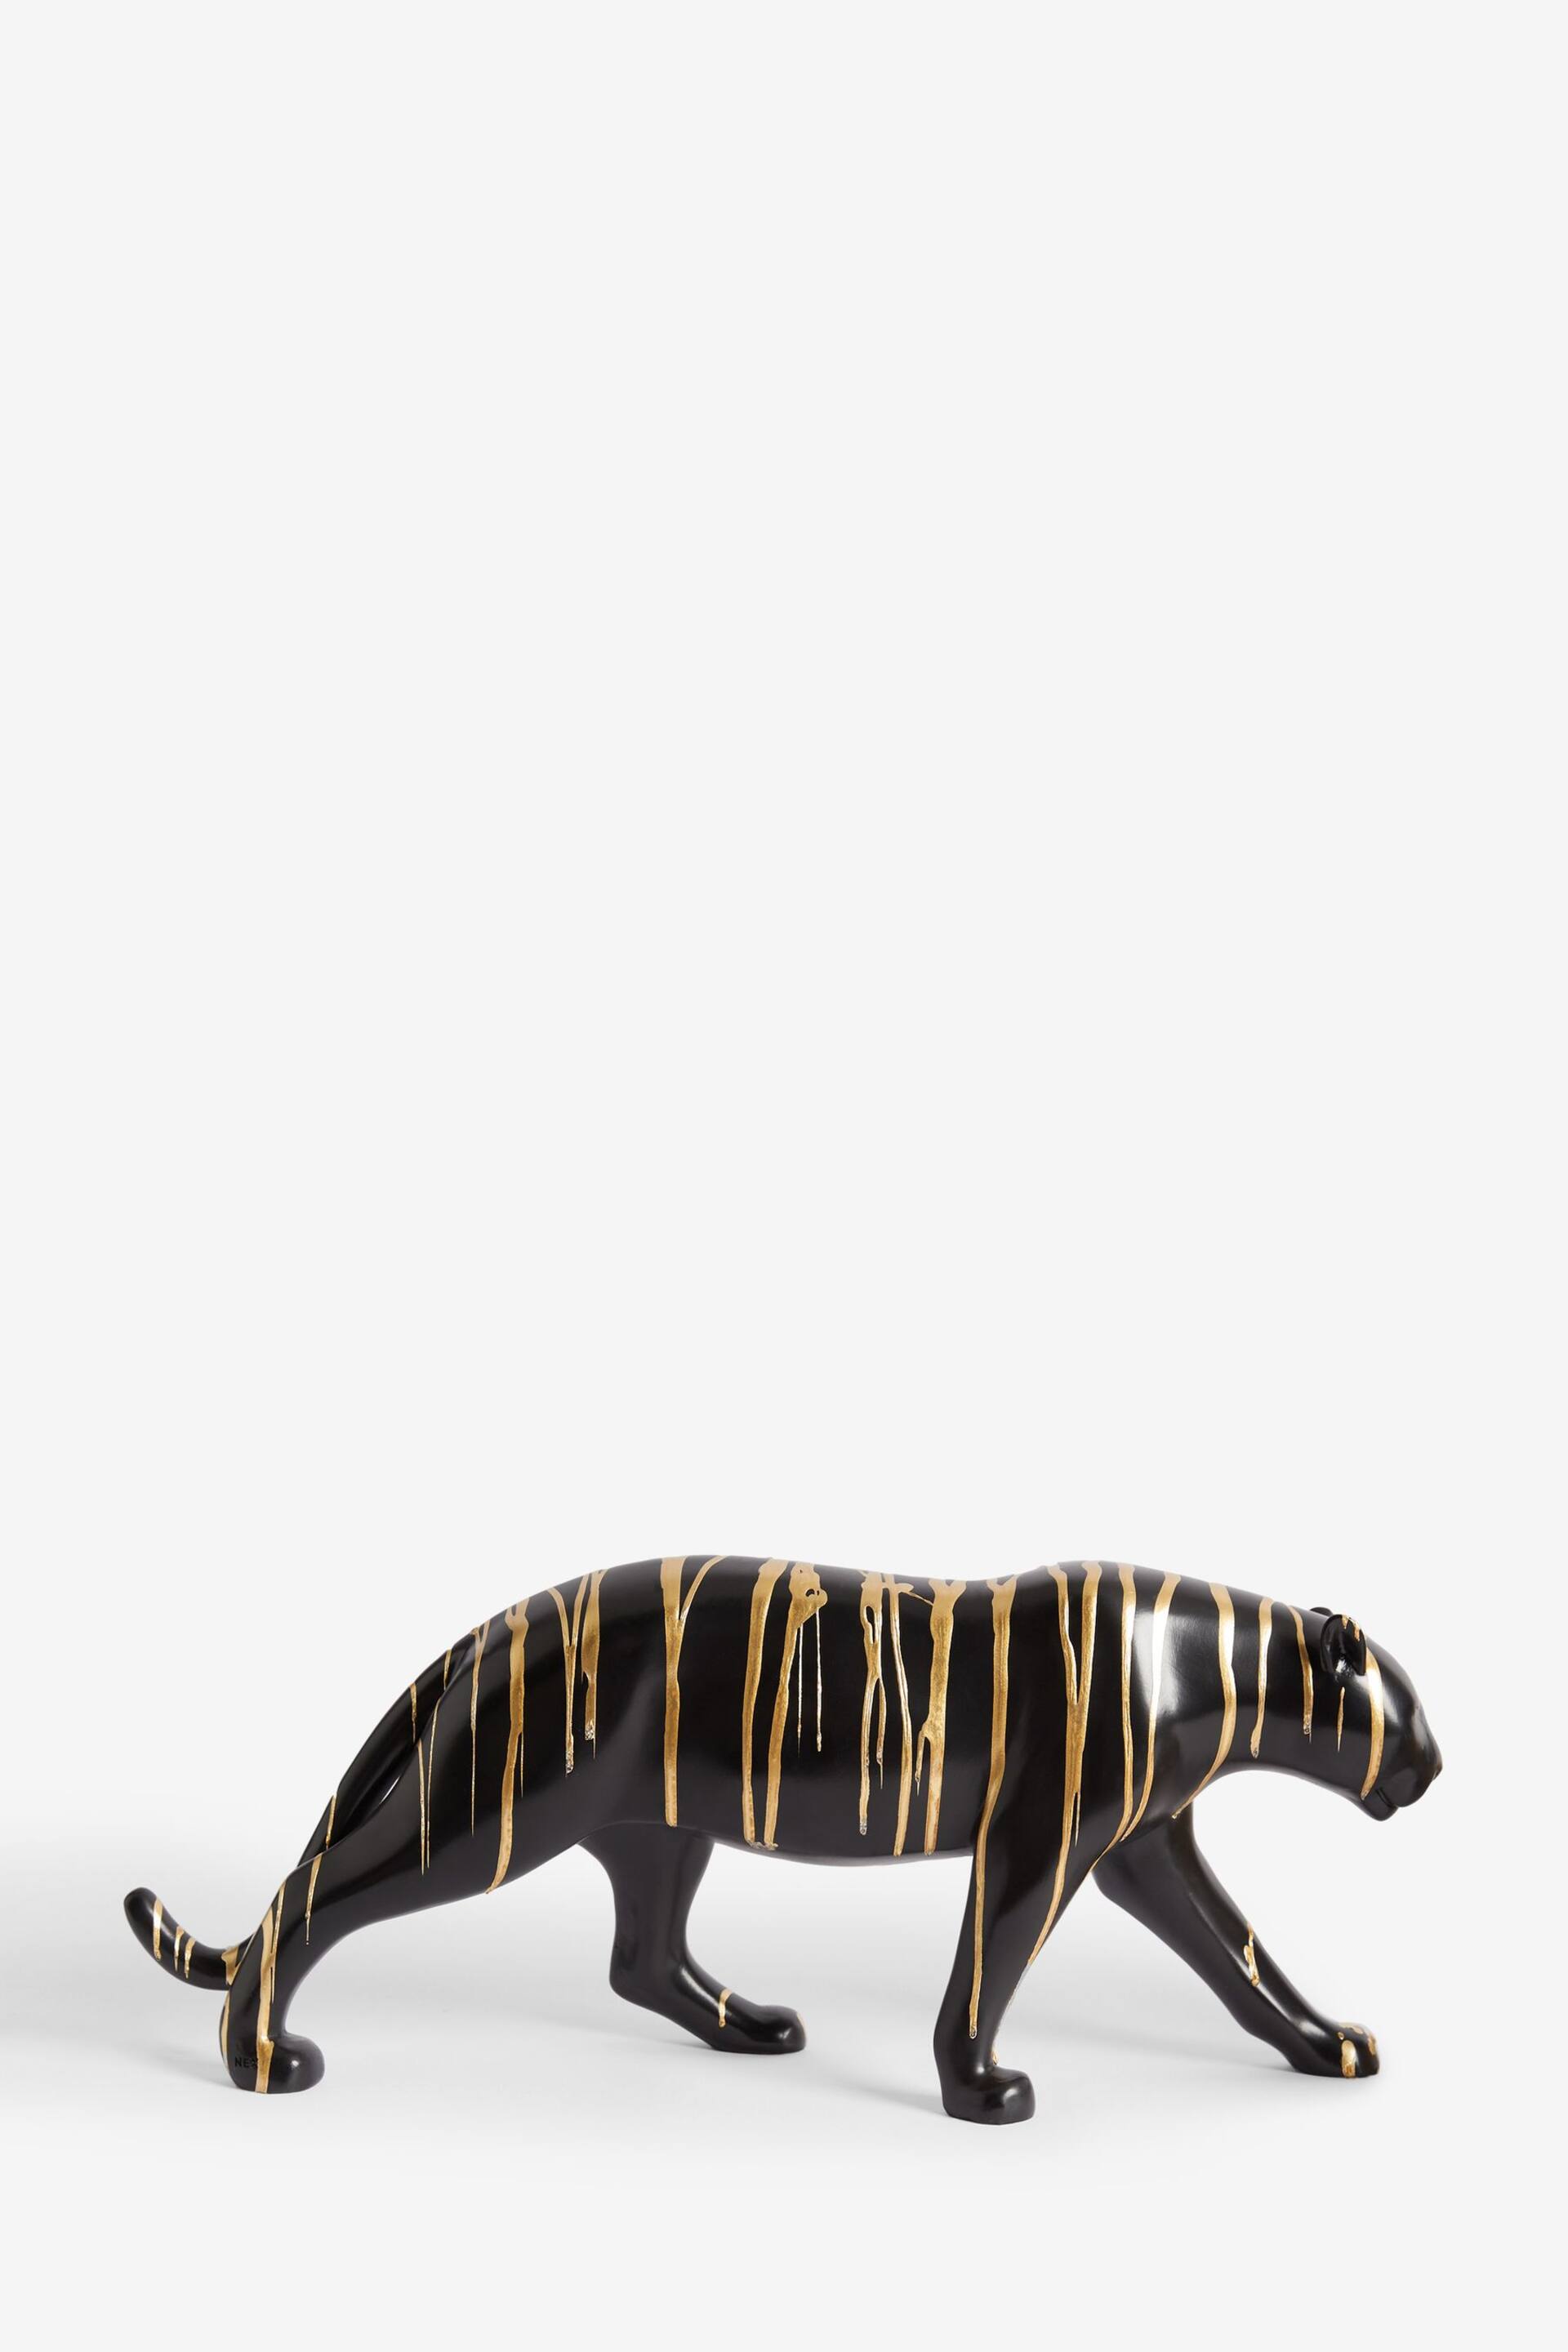 Black Petra the Panther Gold Drip Ornament - Image 3 of 4